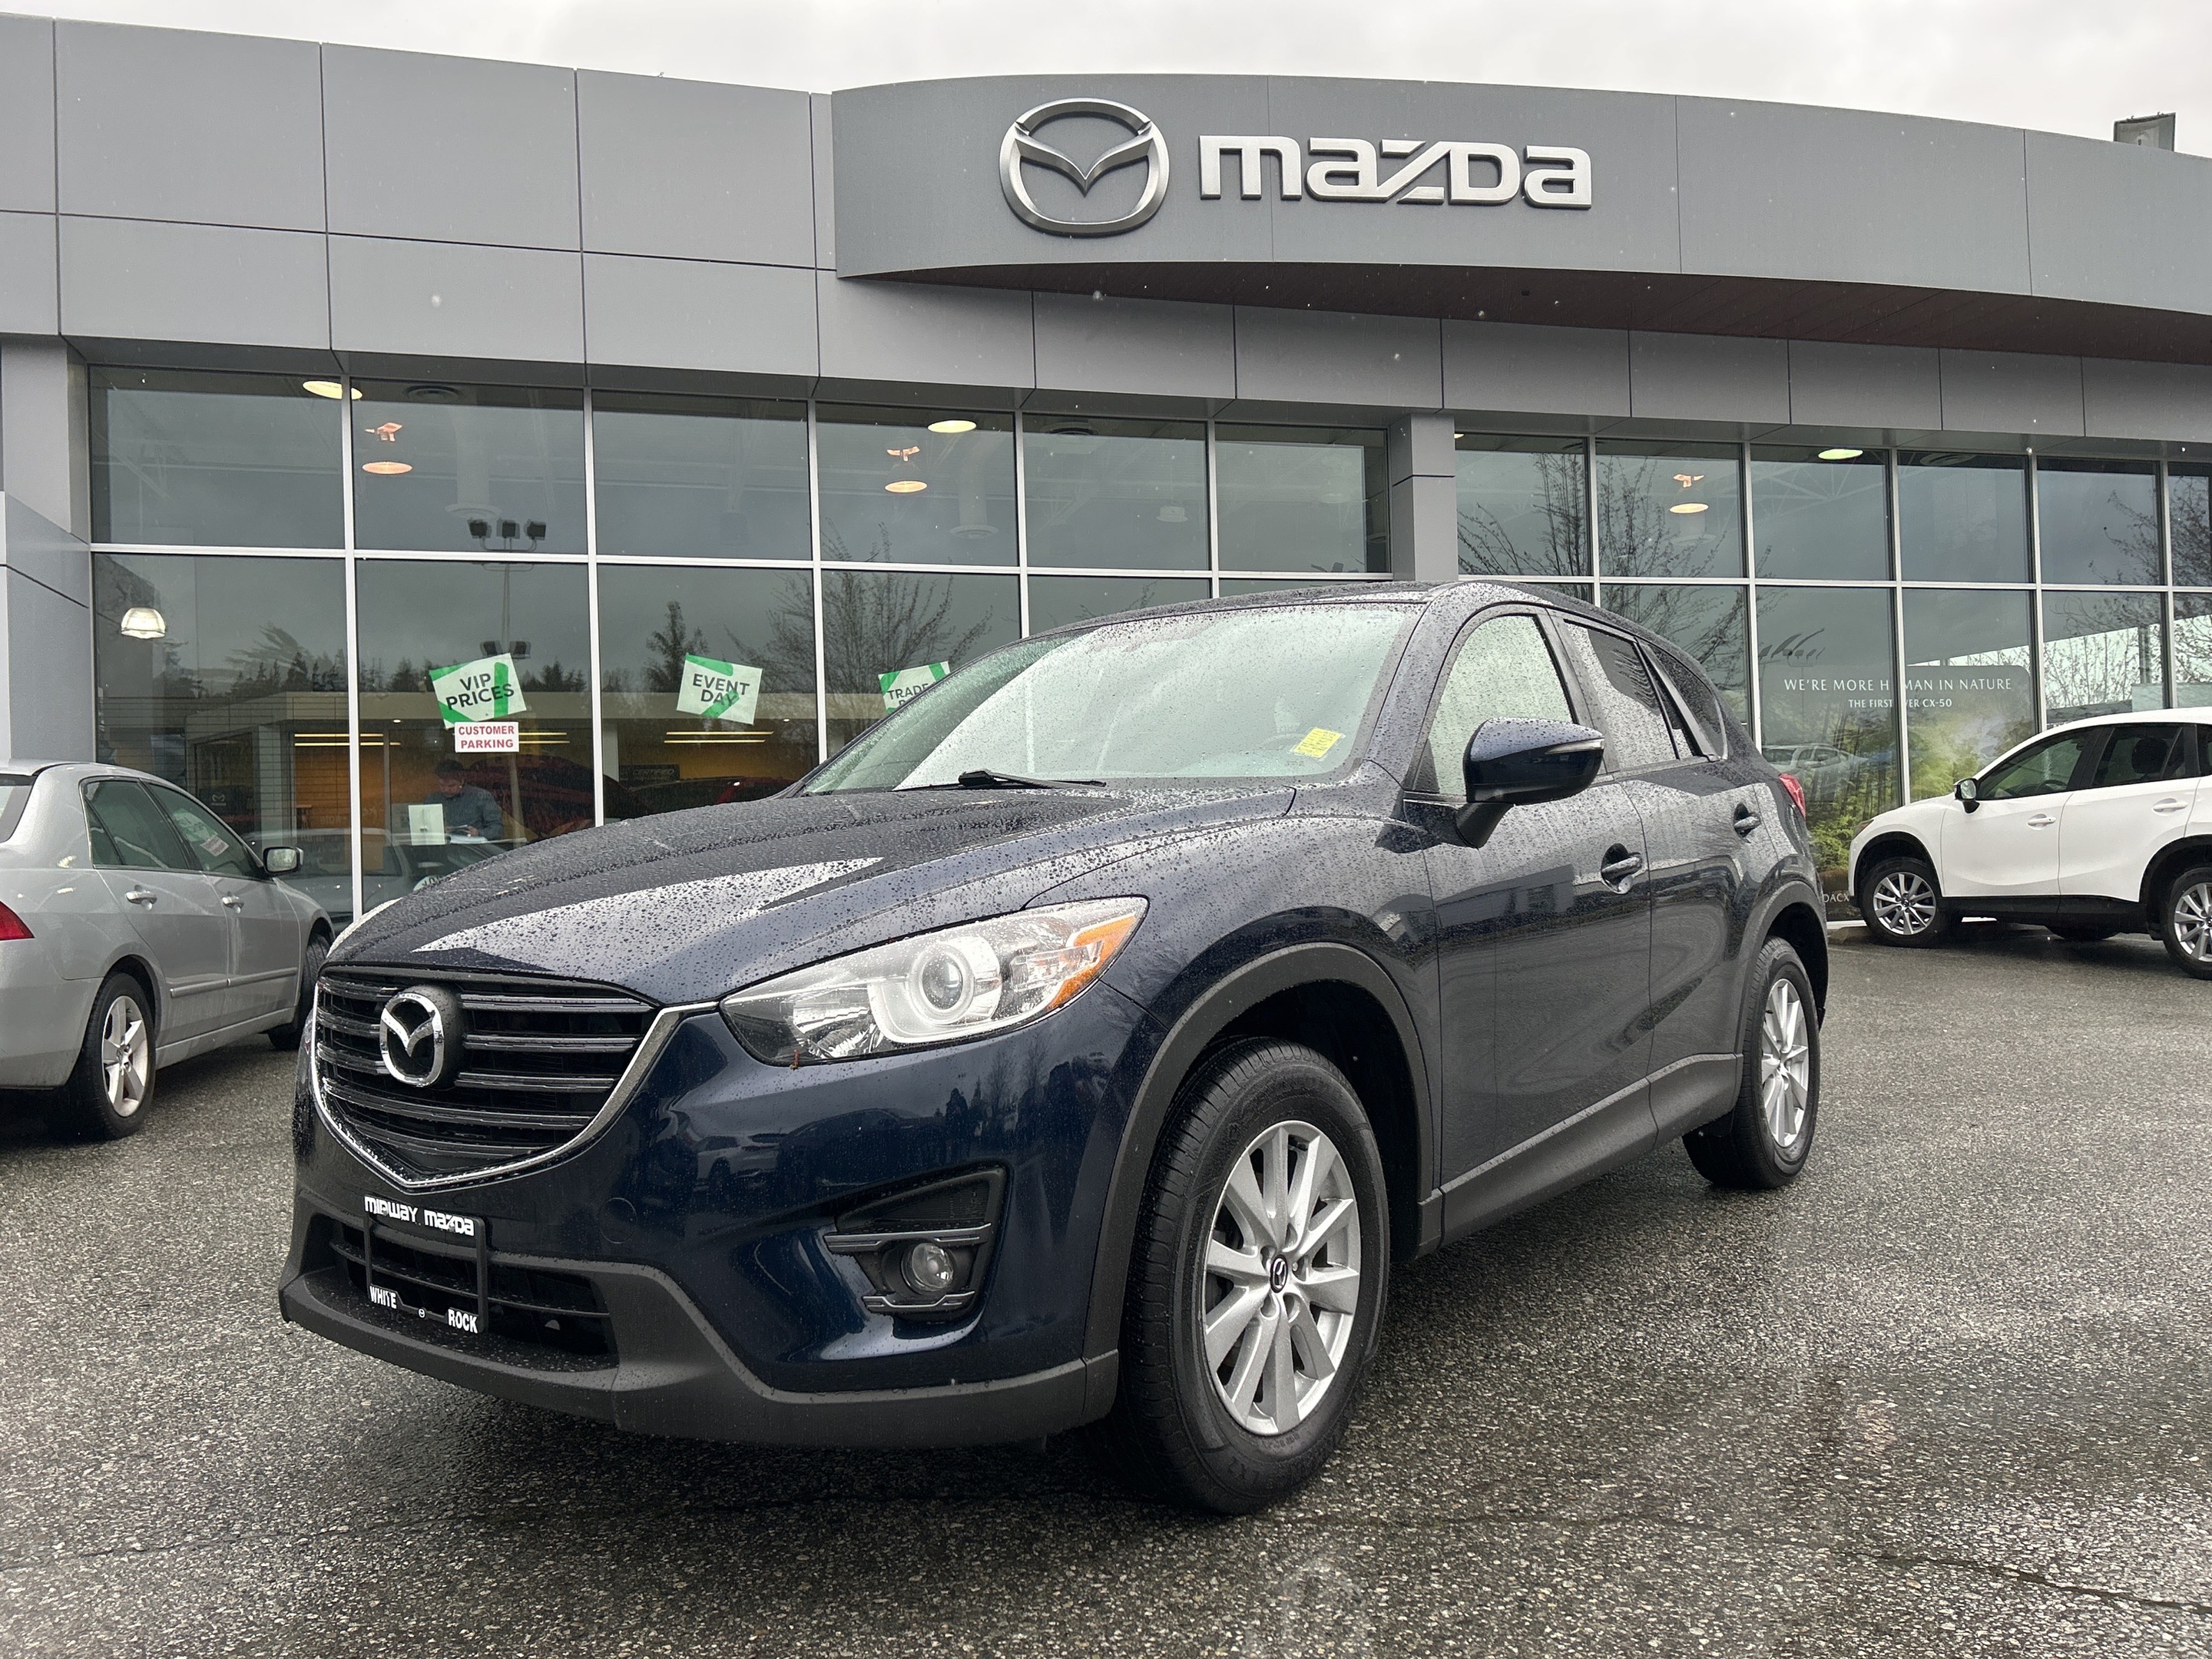 2016 Mazda CX-5 2016.5 GS AWD LUXURY PACKAGE